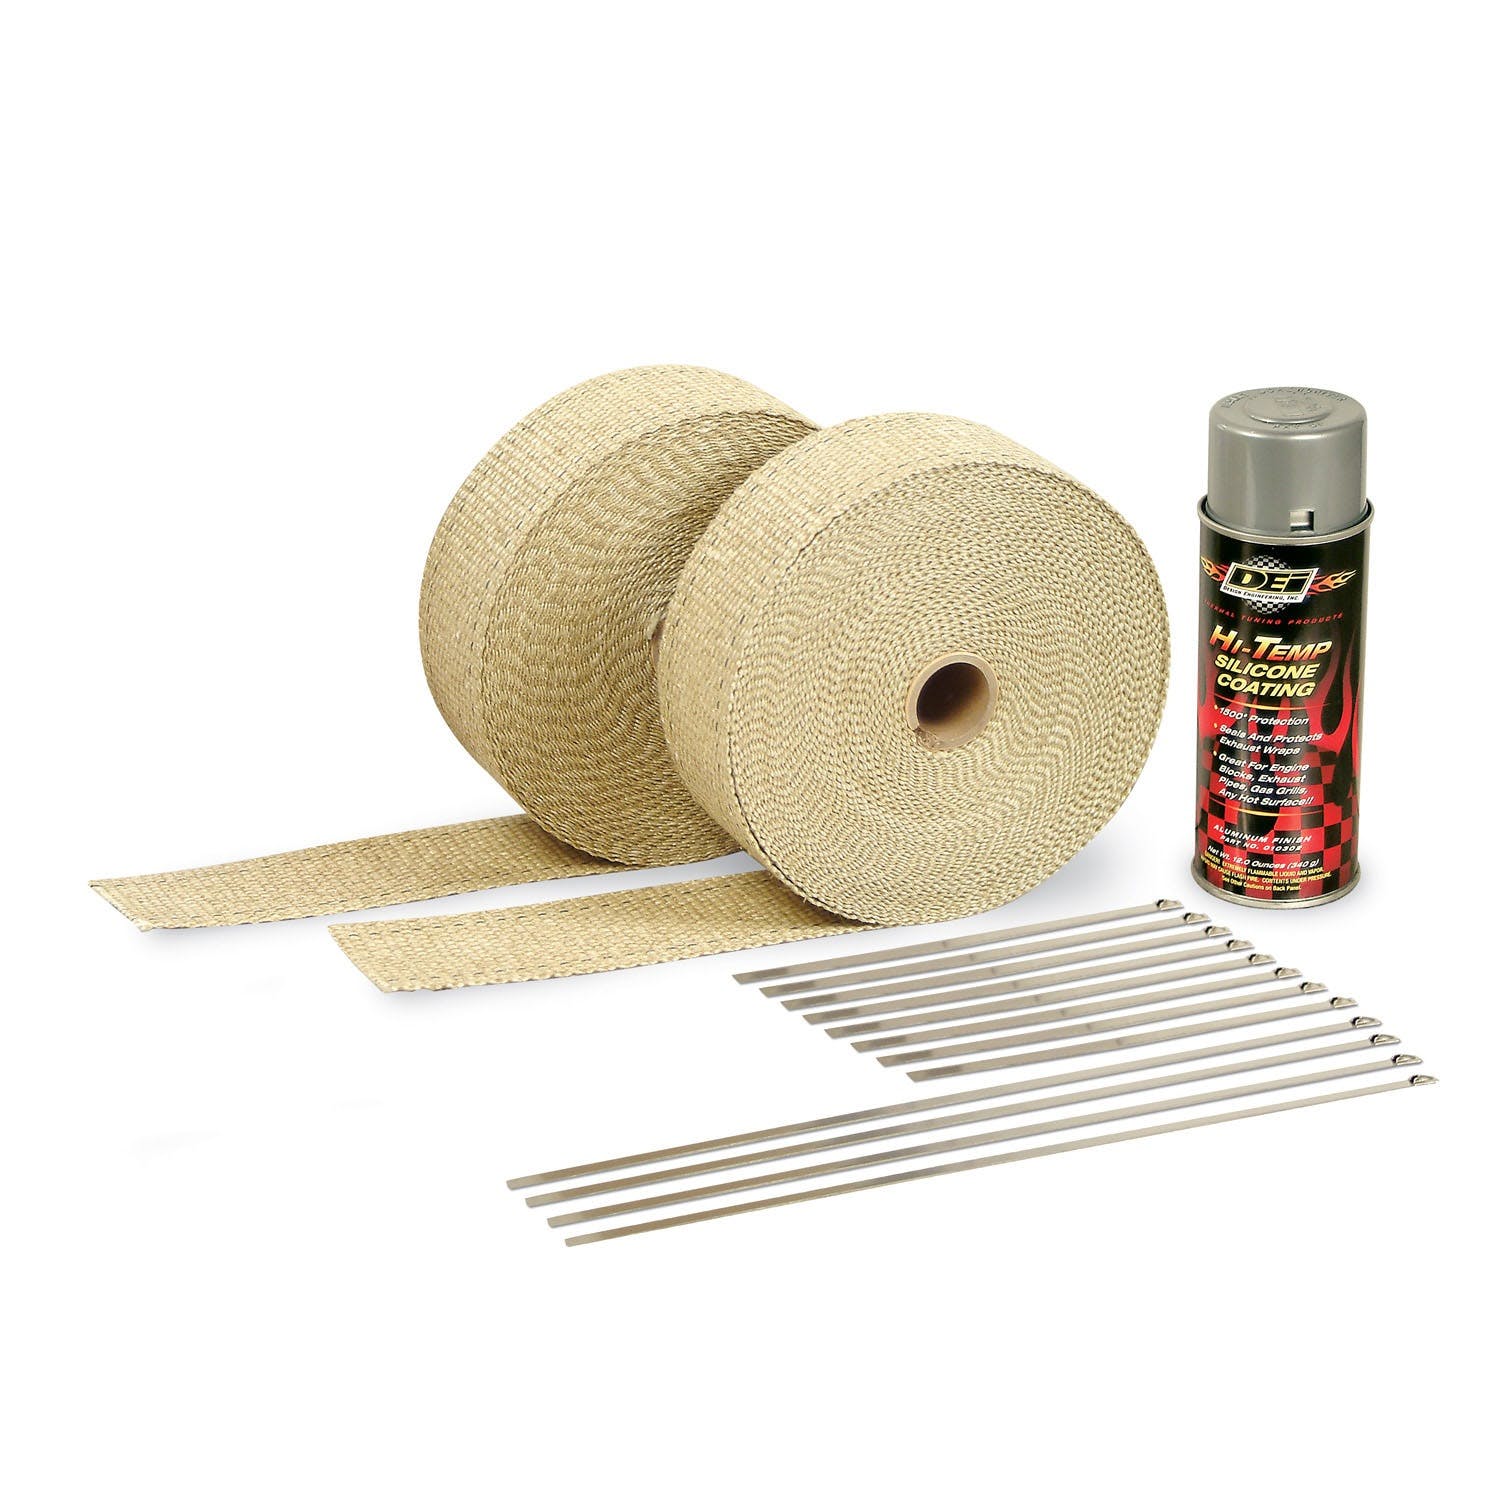 Design Engineering, Inc. 10112 Exhaust Wrap Kit - with Tan Wrap and Aluminum HT Silicone Coating